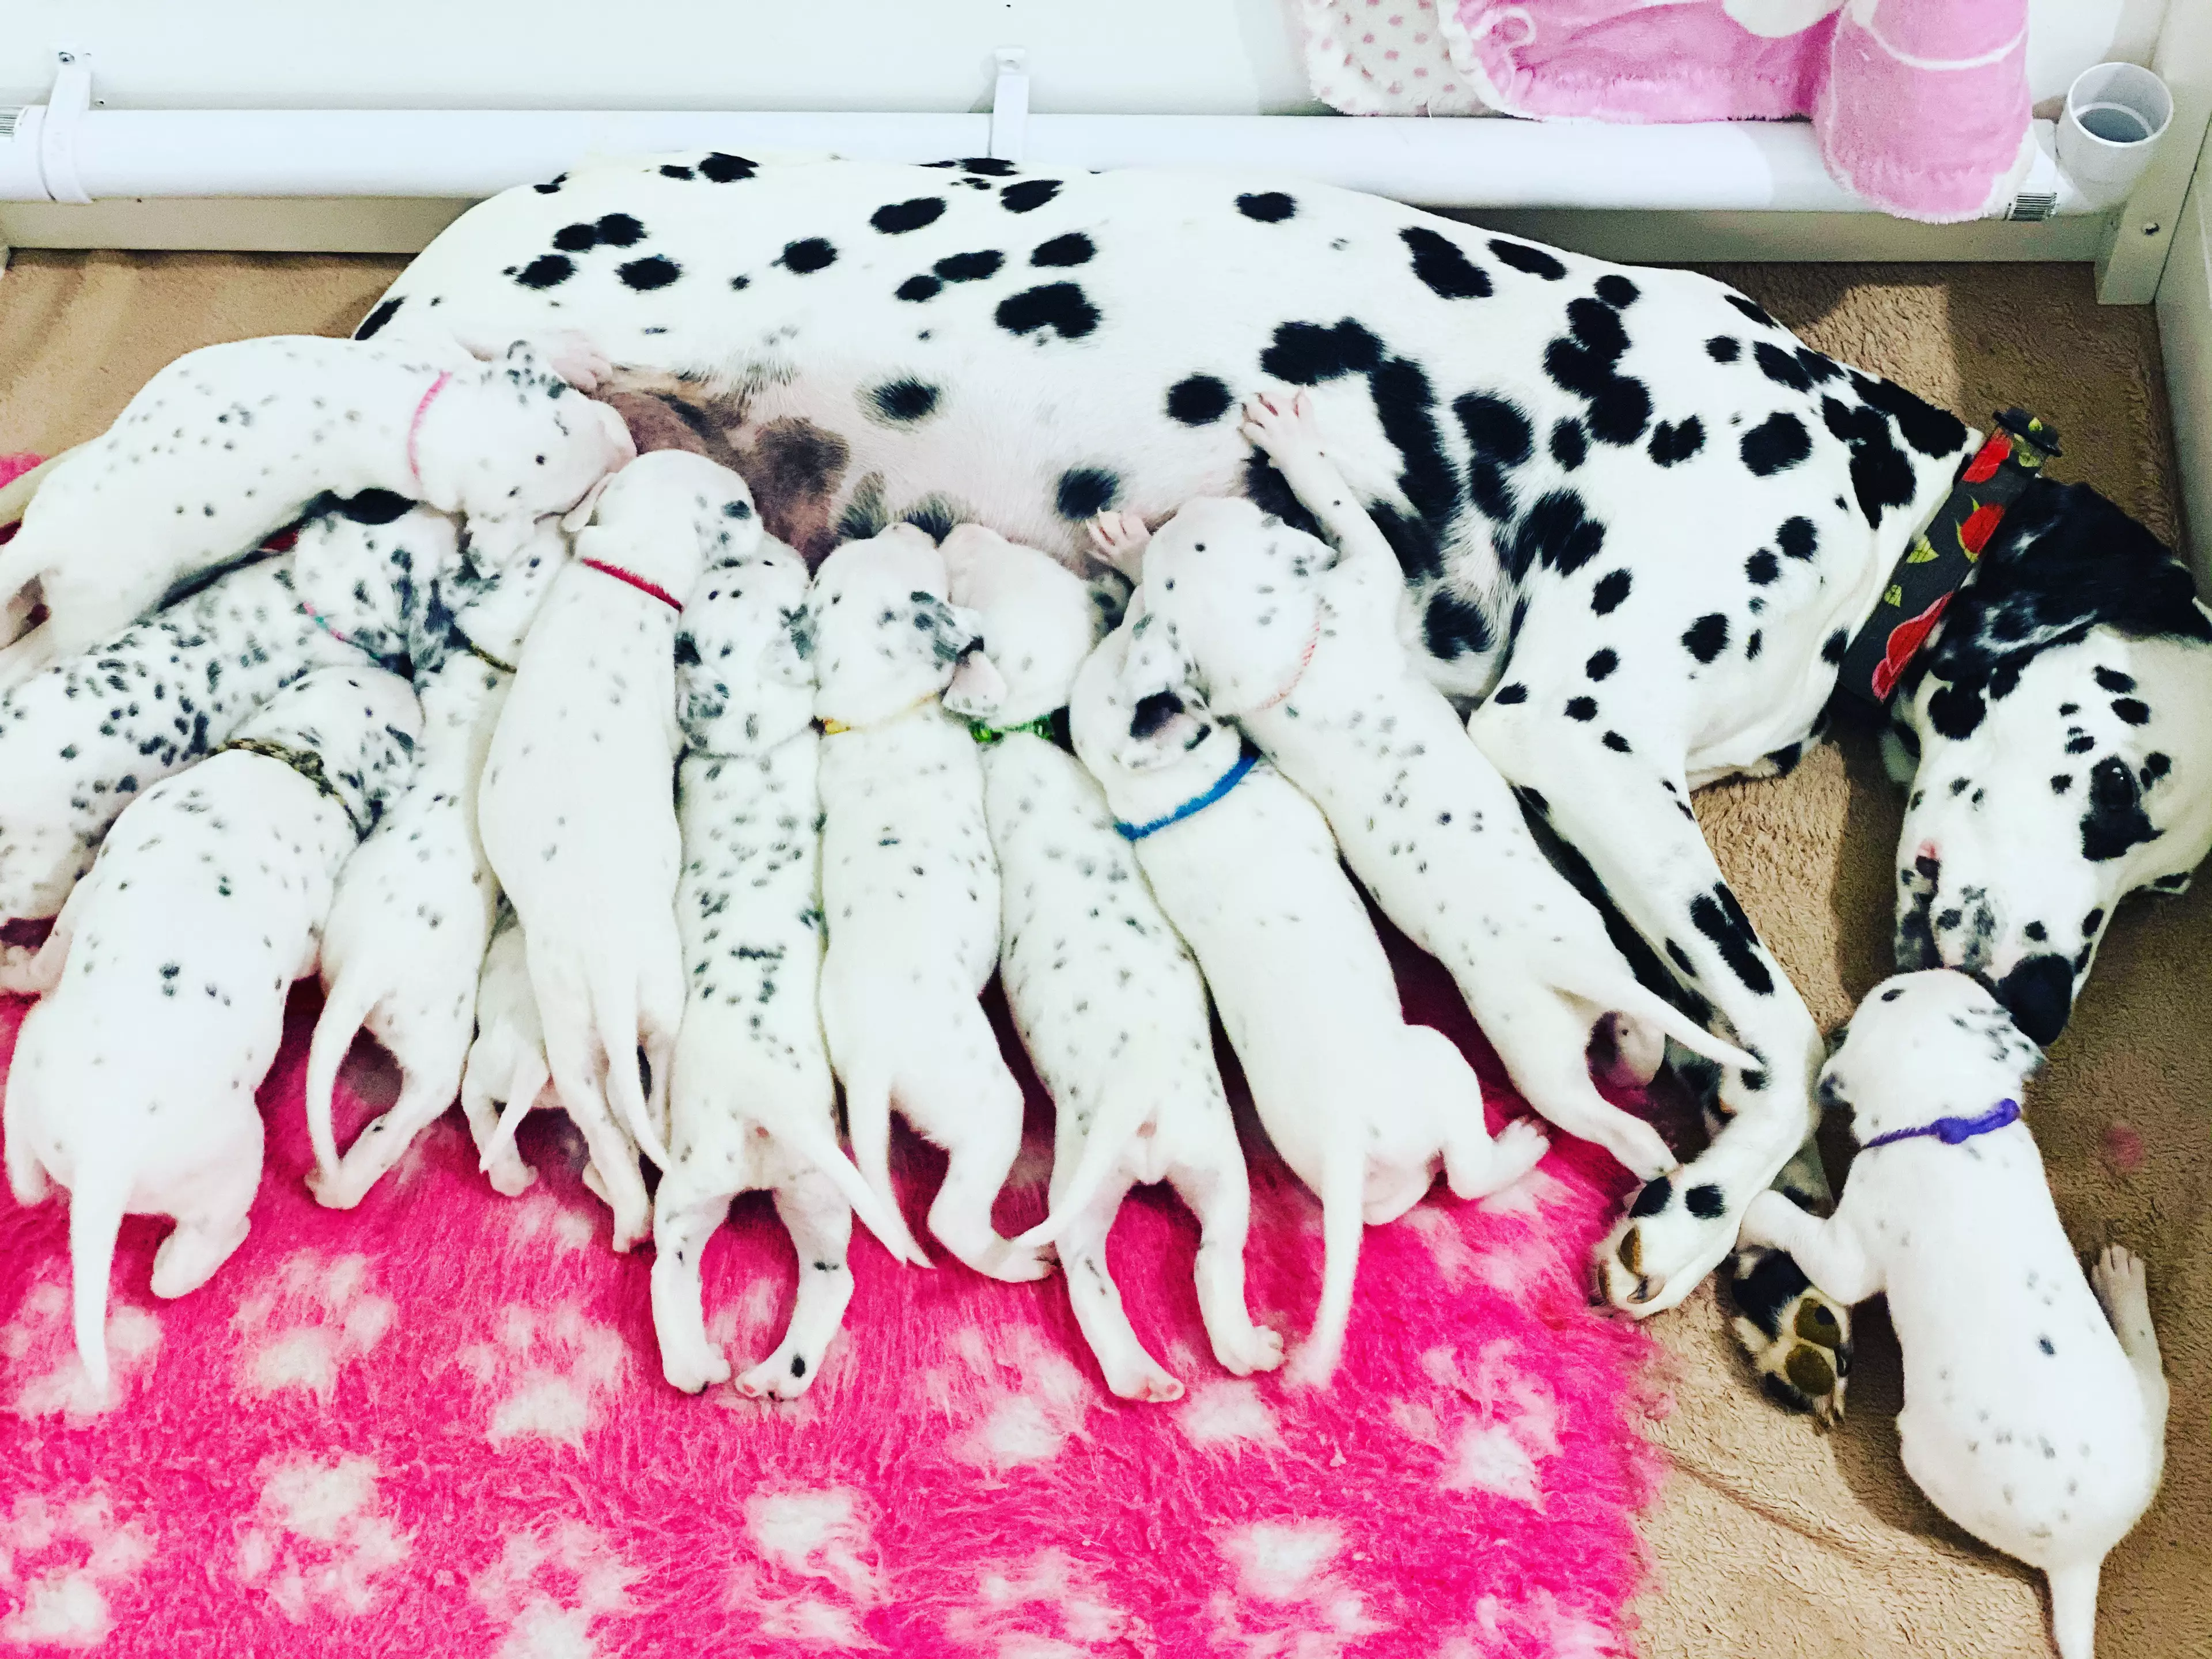 The mum gave birth to 12 pups in total (